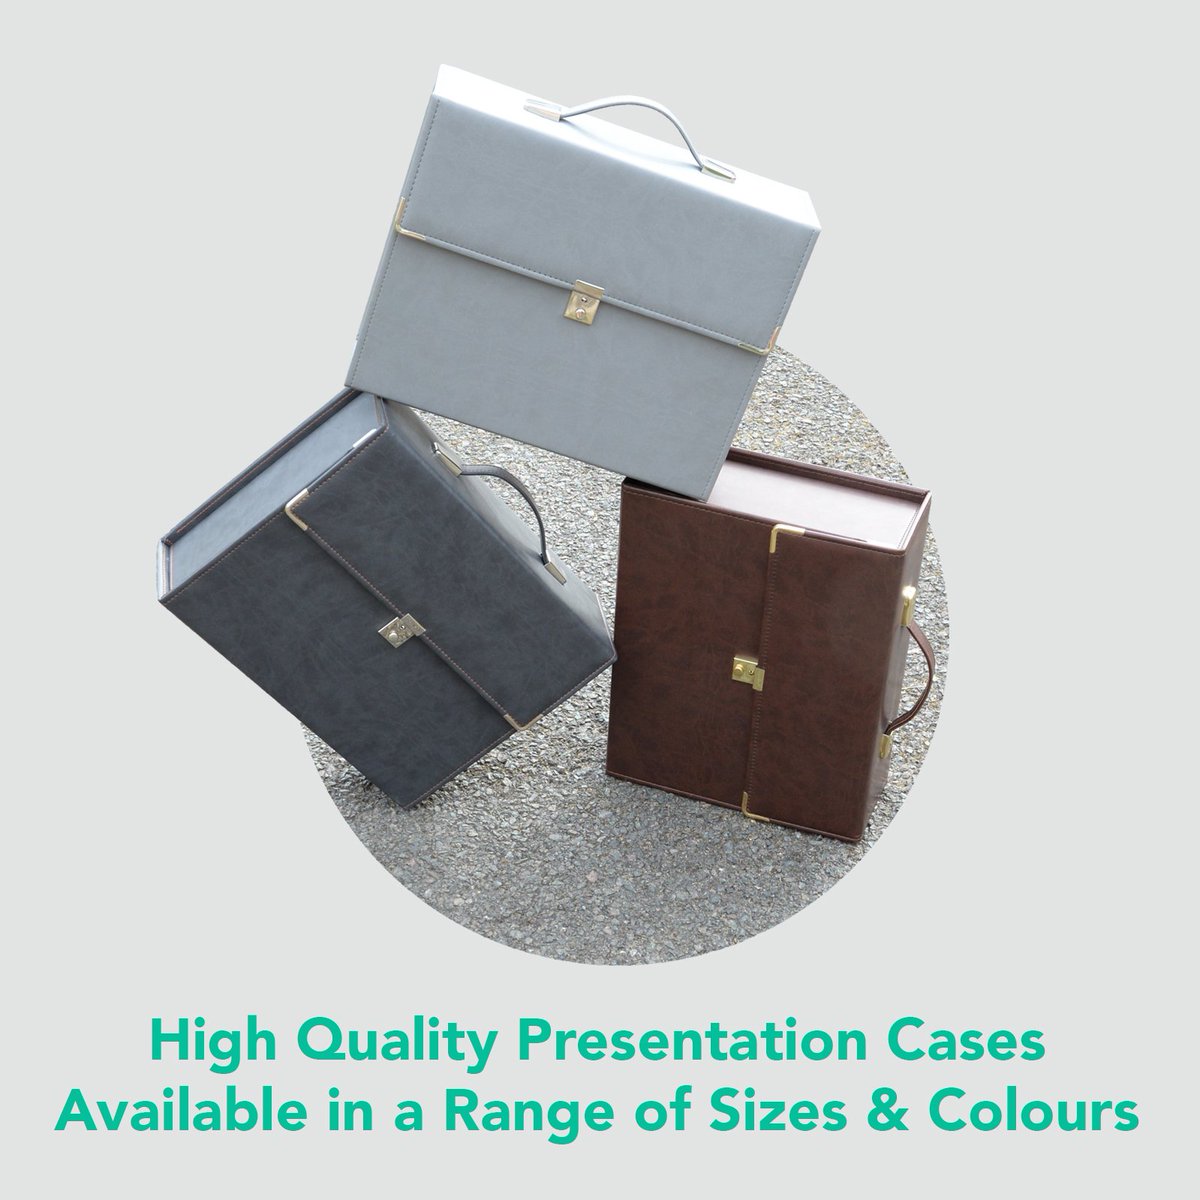 High Quality Presentation Cases Available in Range of Sizes and Colours all that here at Celsur
#celsur #celsurplastics #highquality #leathercases #pucase #case #homeowner #homeownerbox #box #pubox #presentationcase #homecase #dvdcase #cdcase